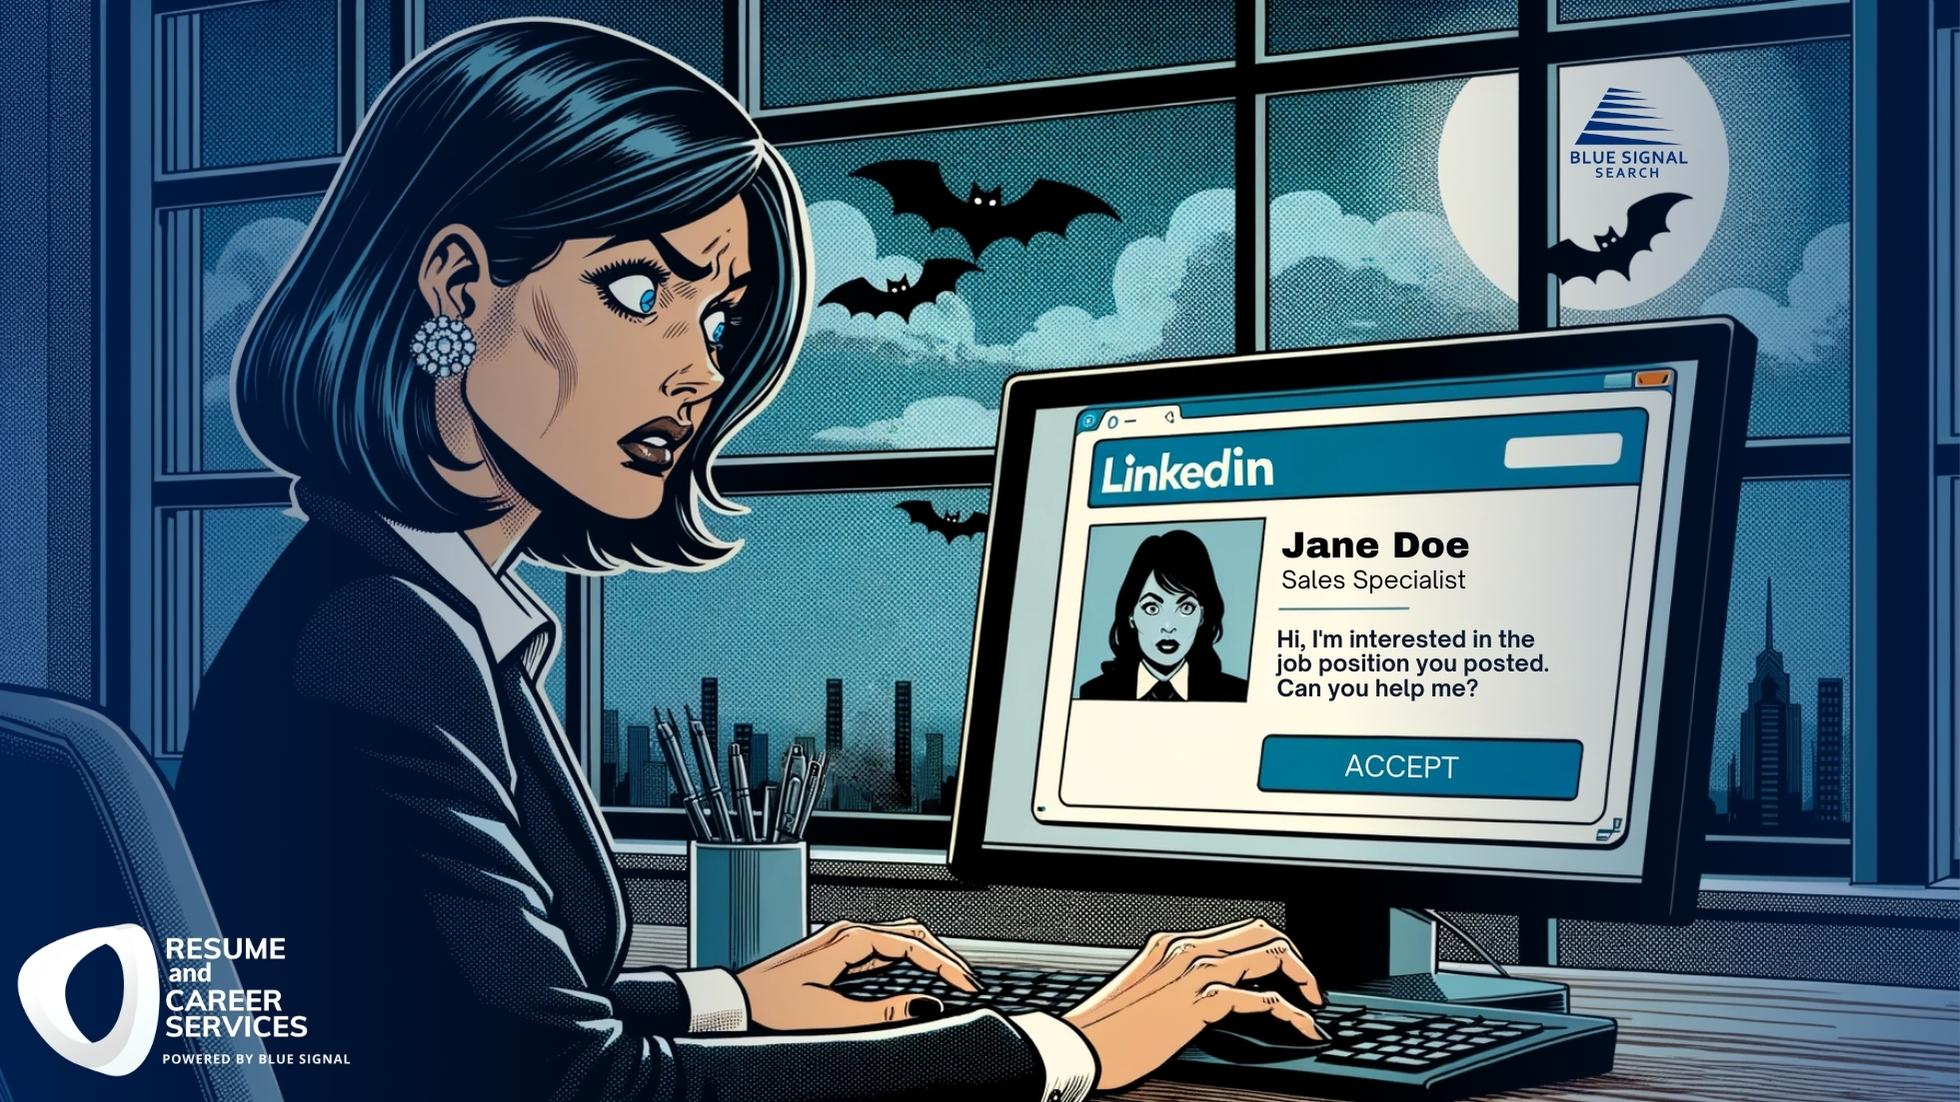 Cartoon Blue Signal recruiter looks annoyingly at the computer screen when she witnesses a LinkedIn etiquette horror as she receives a connection request rudely asking of her help with no polite professionalism.